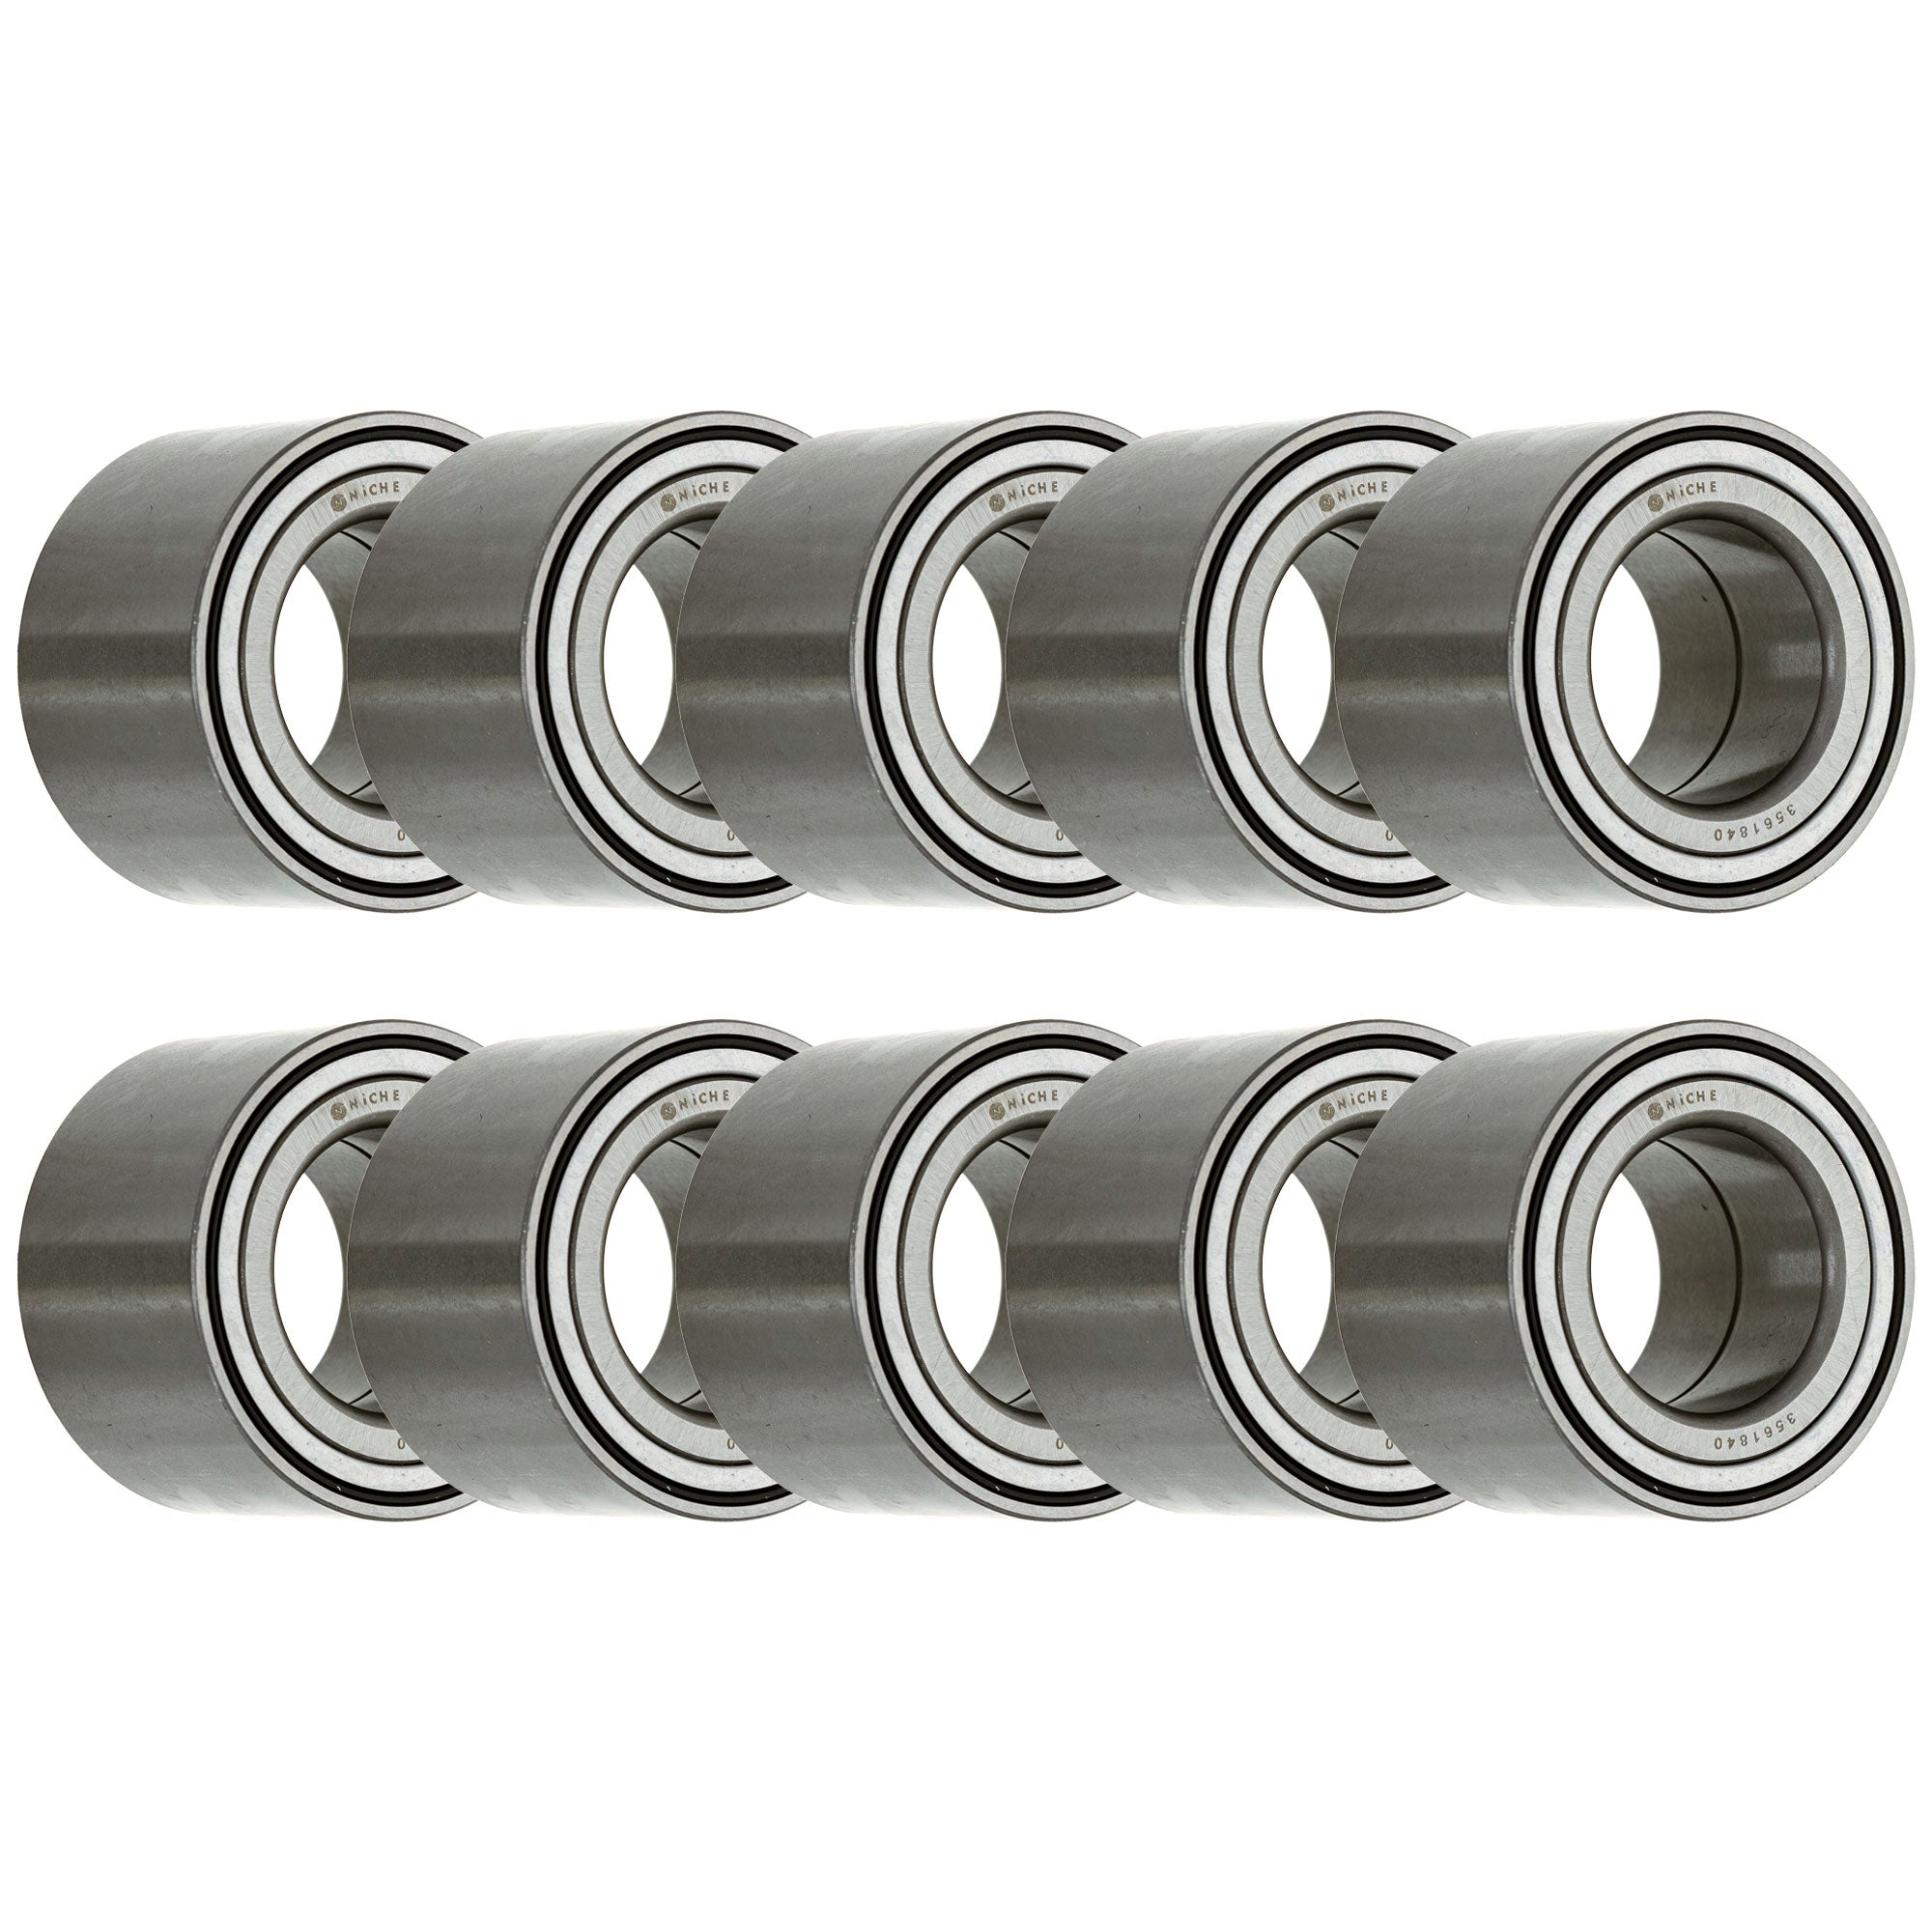 Double Row, Angular Contact, Ball Bearing Pack of 10 10-Pack for zOTHER King Concours NICHE 519-CBB2216R